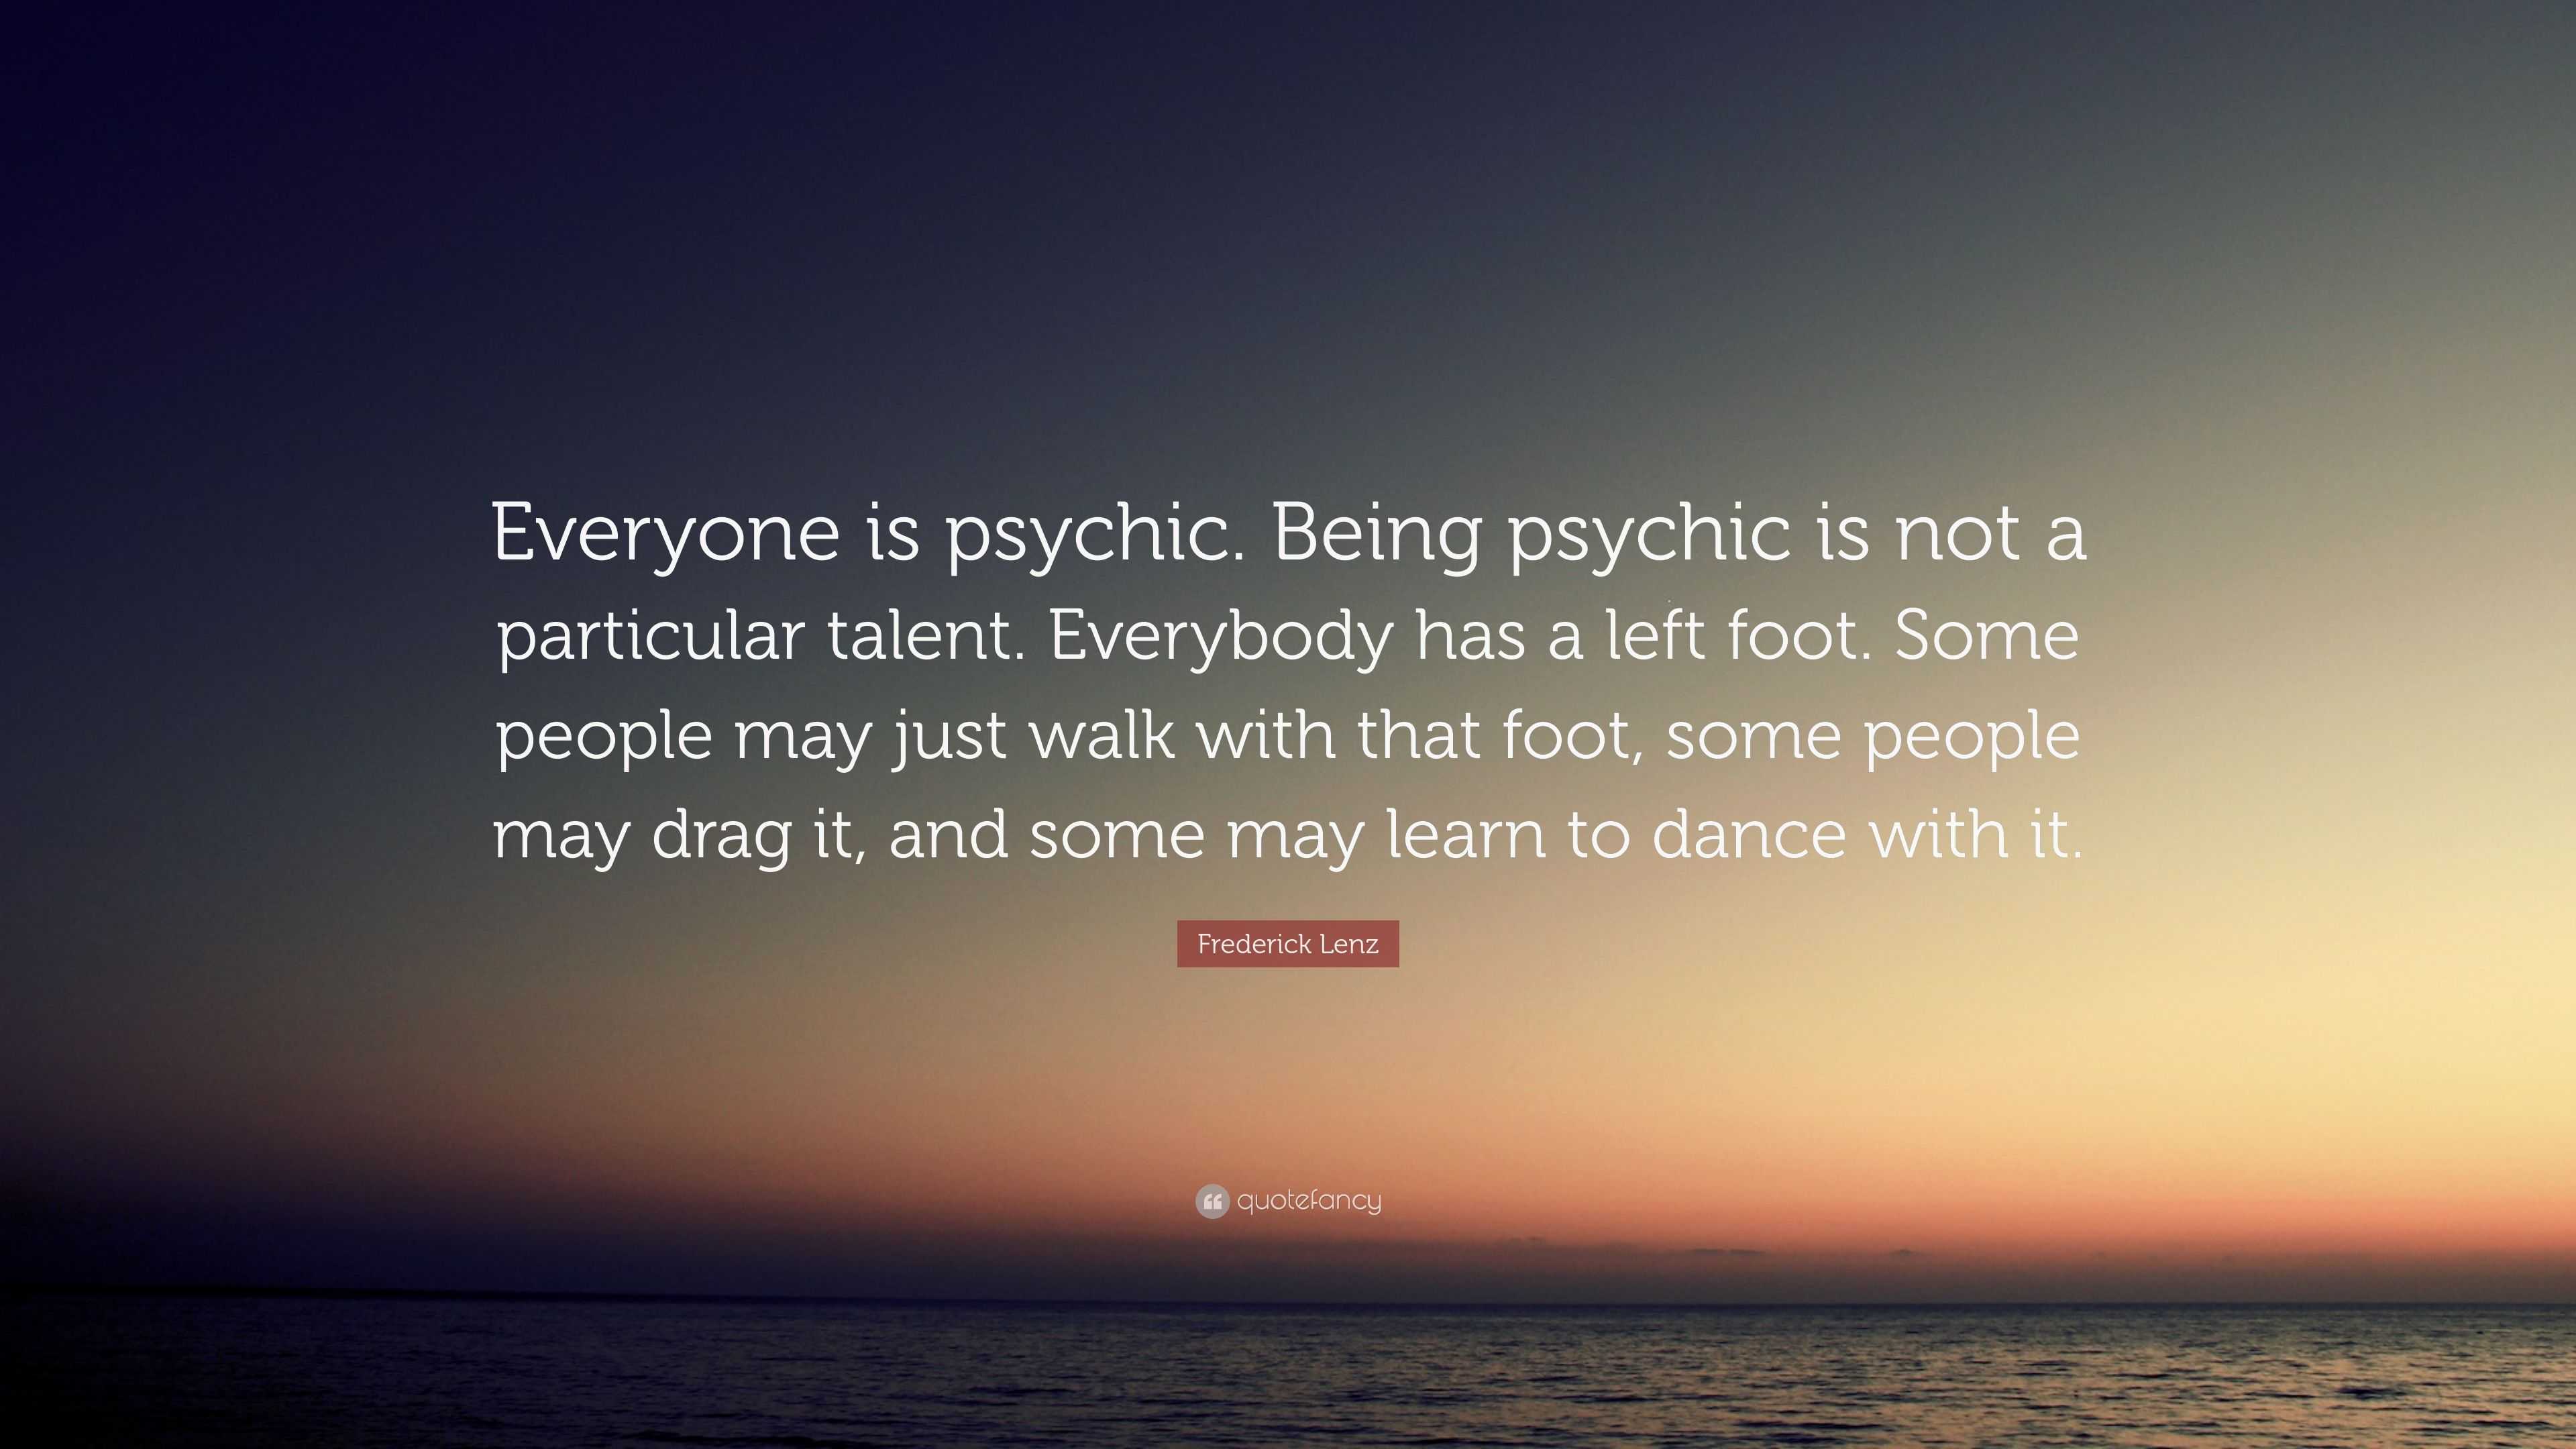 6146222 Frederick Lenz Quote Everyone Is Psychic Being Psychic Is Not A 